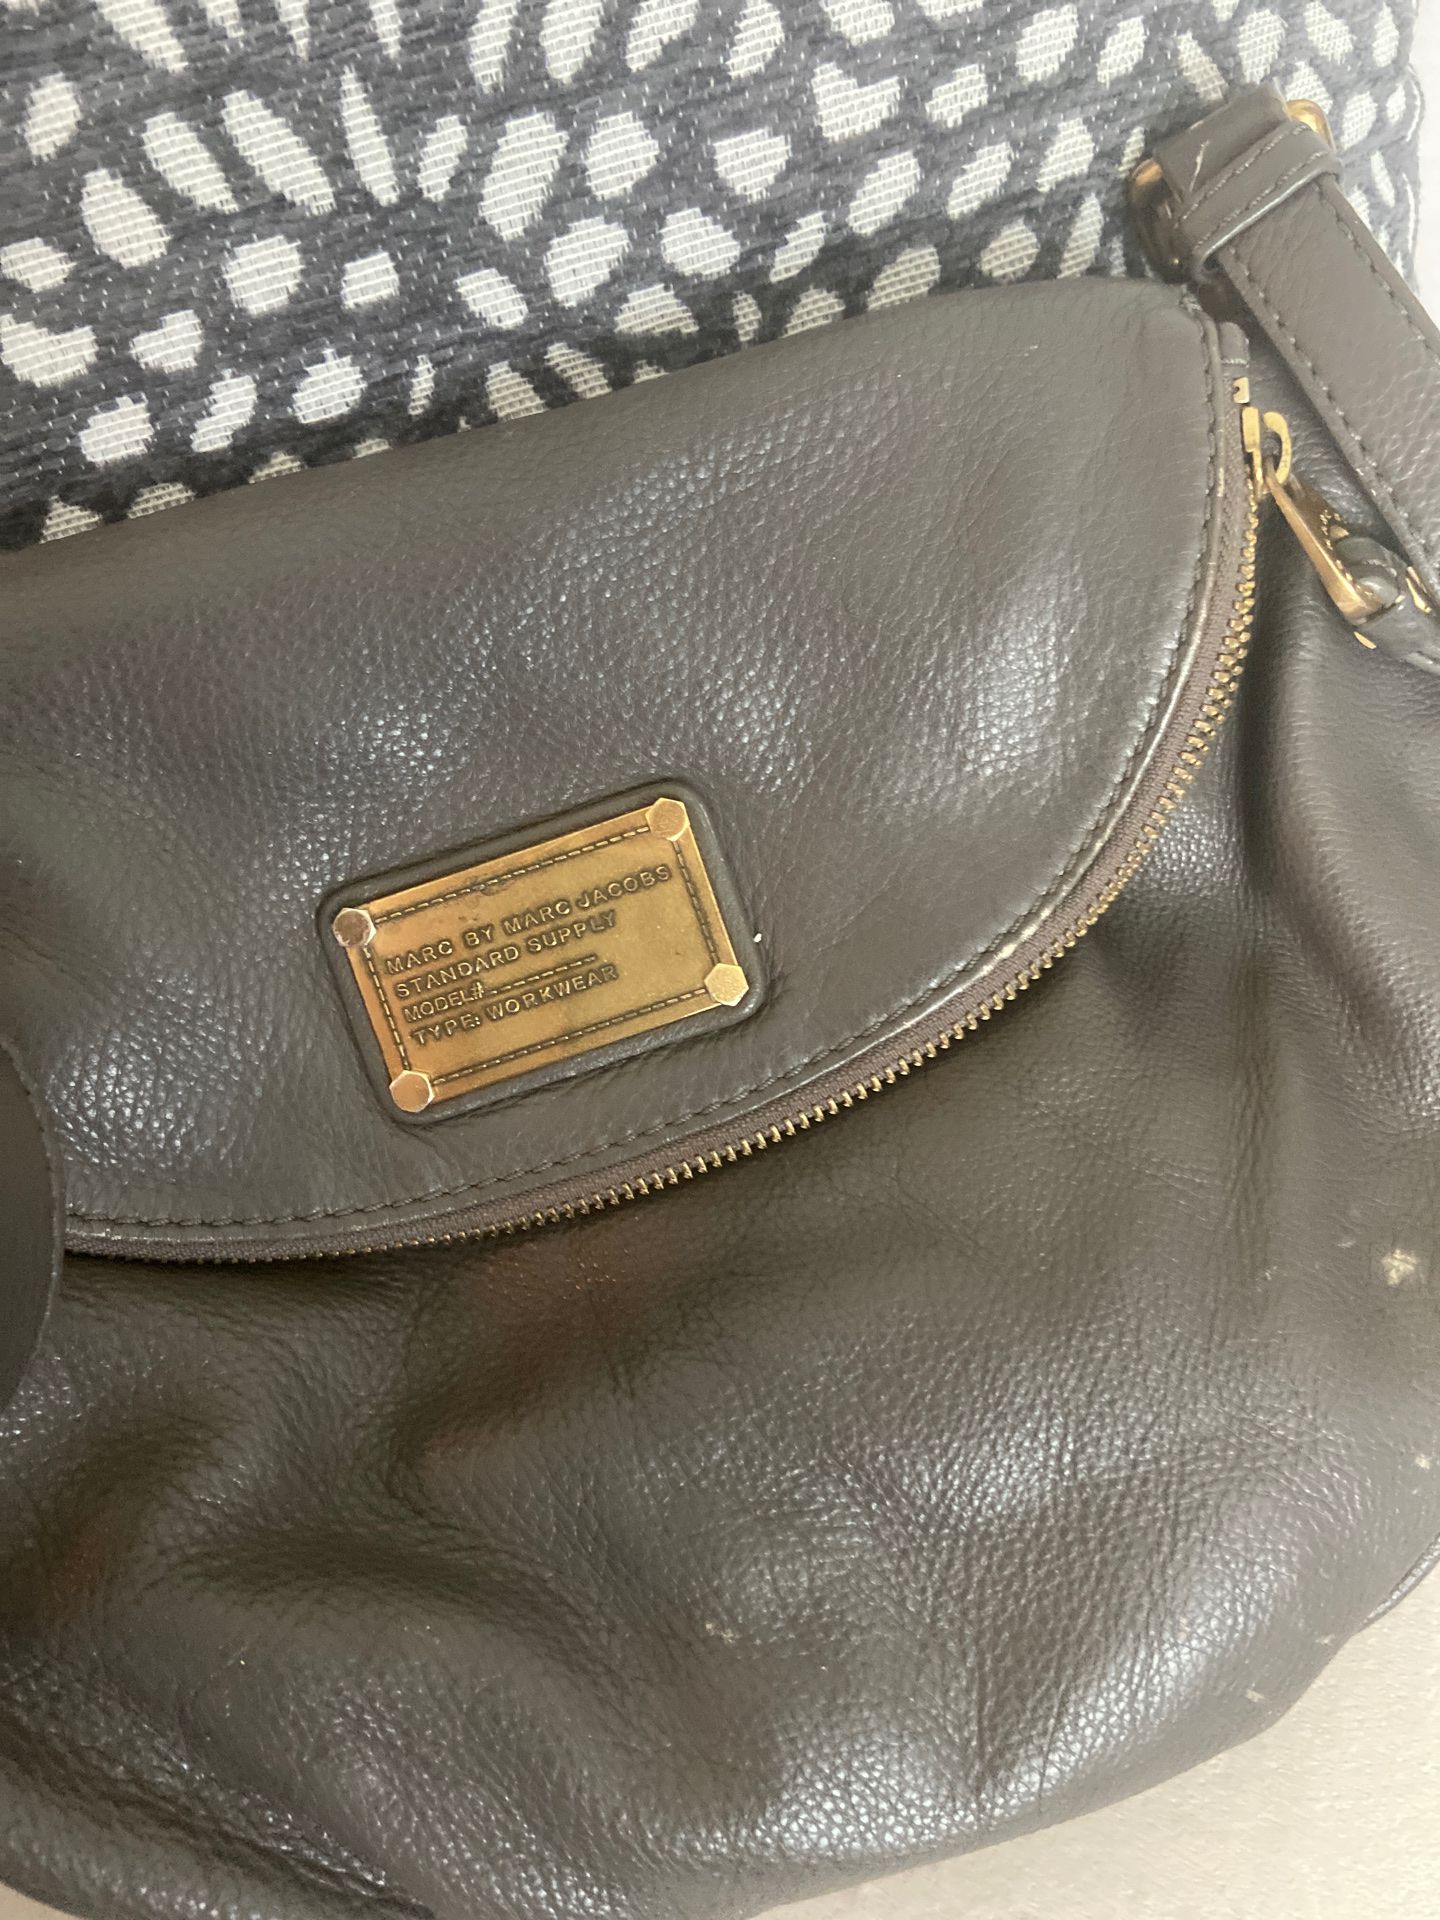 Marc by Marc Jacobs crossbody bag